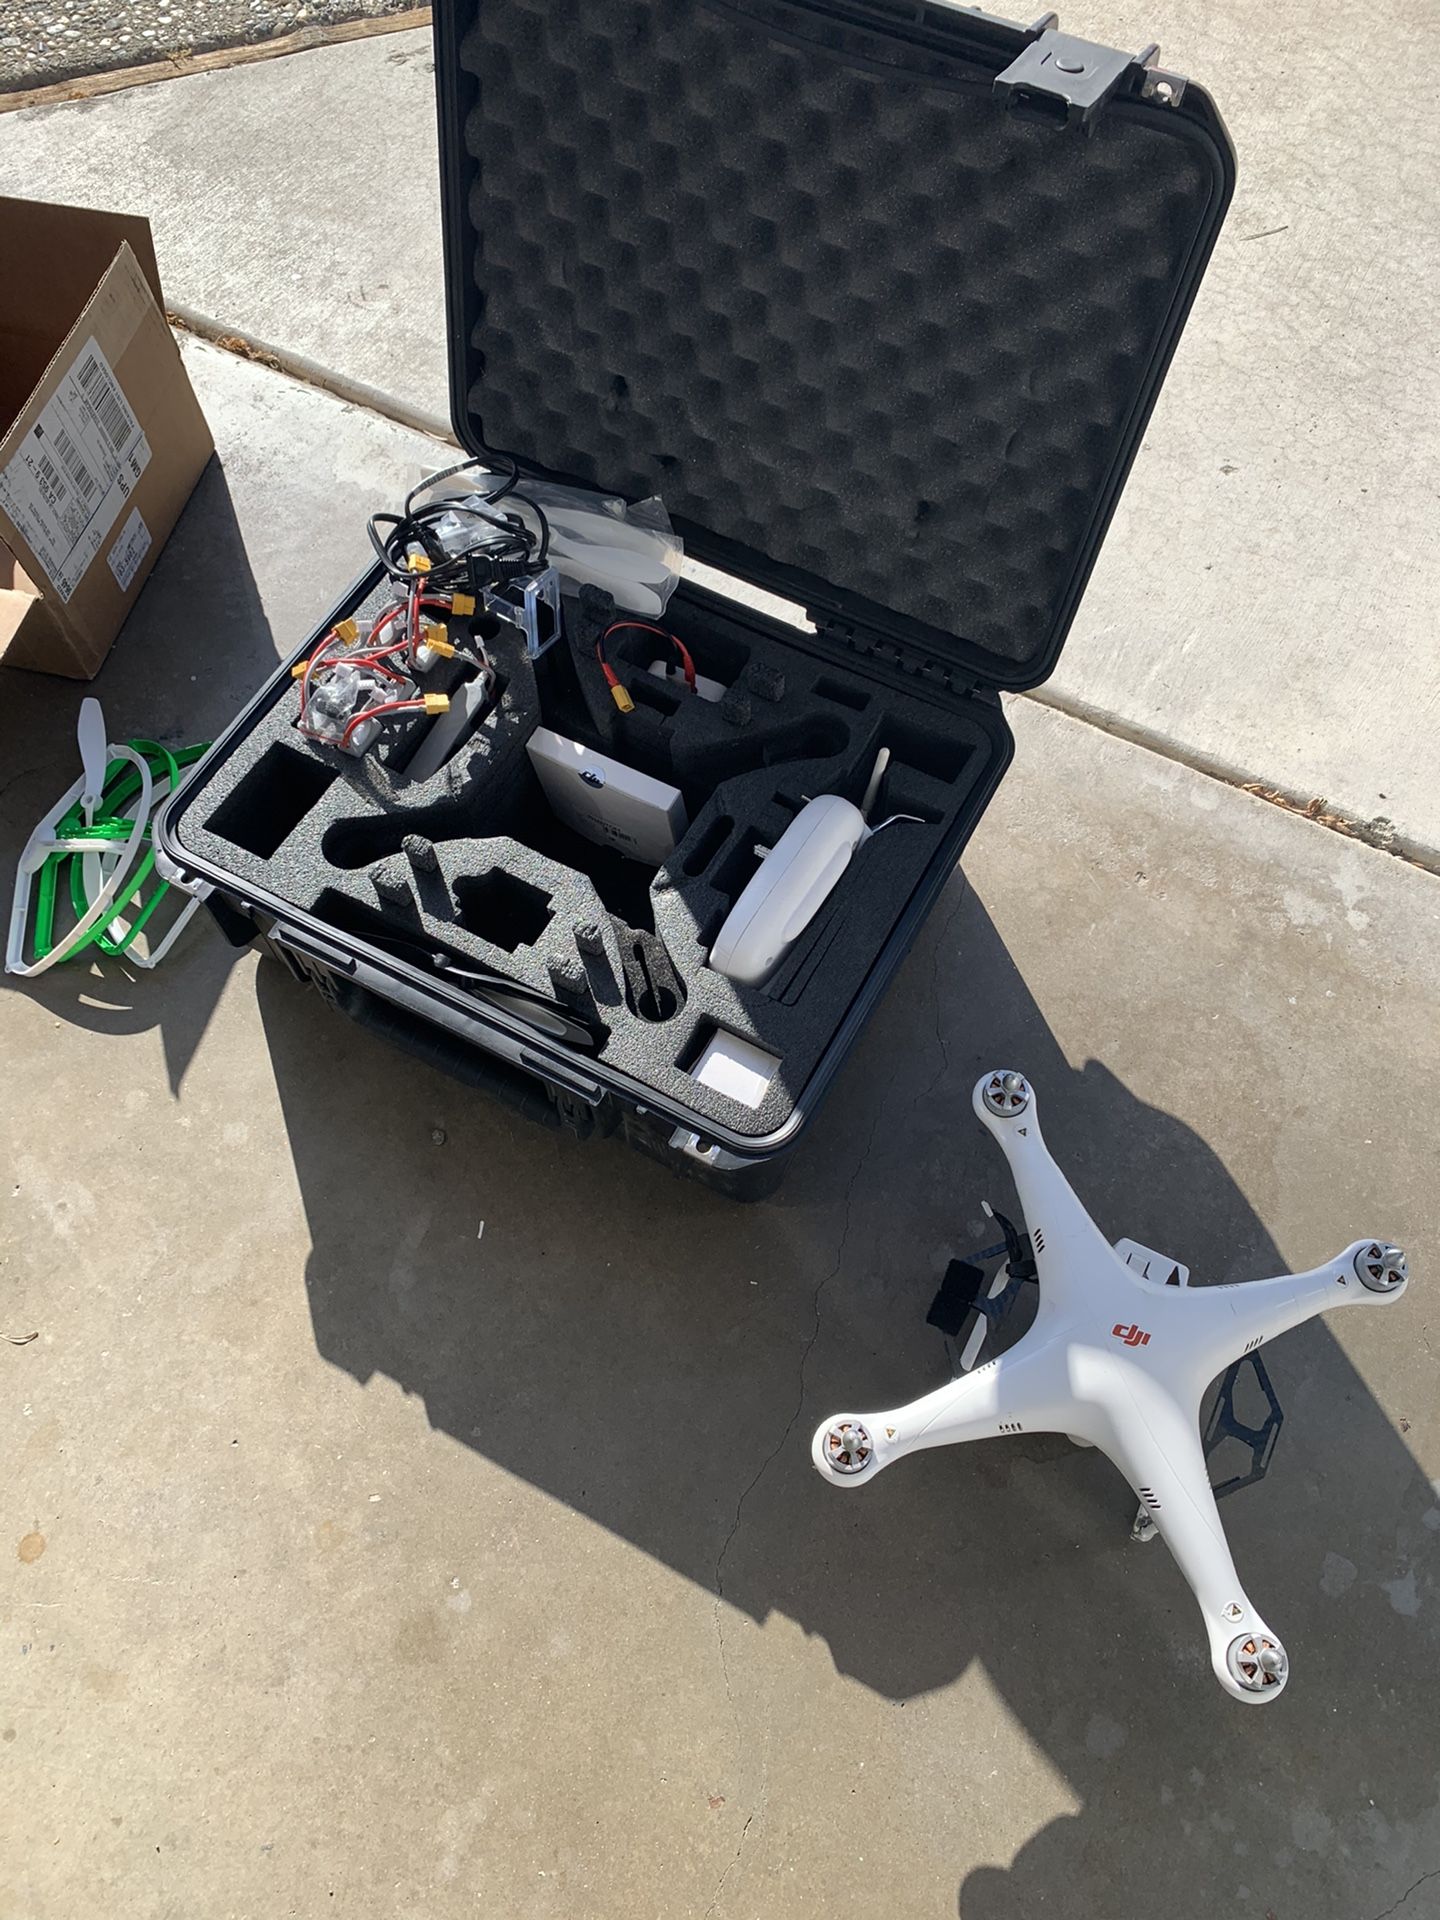 DJI phantom - Flys Great with lots of batteries and extras